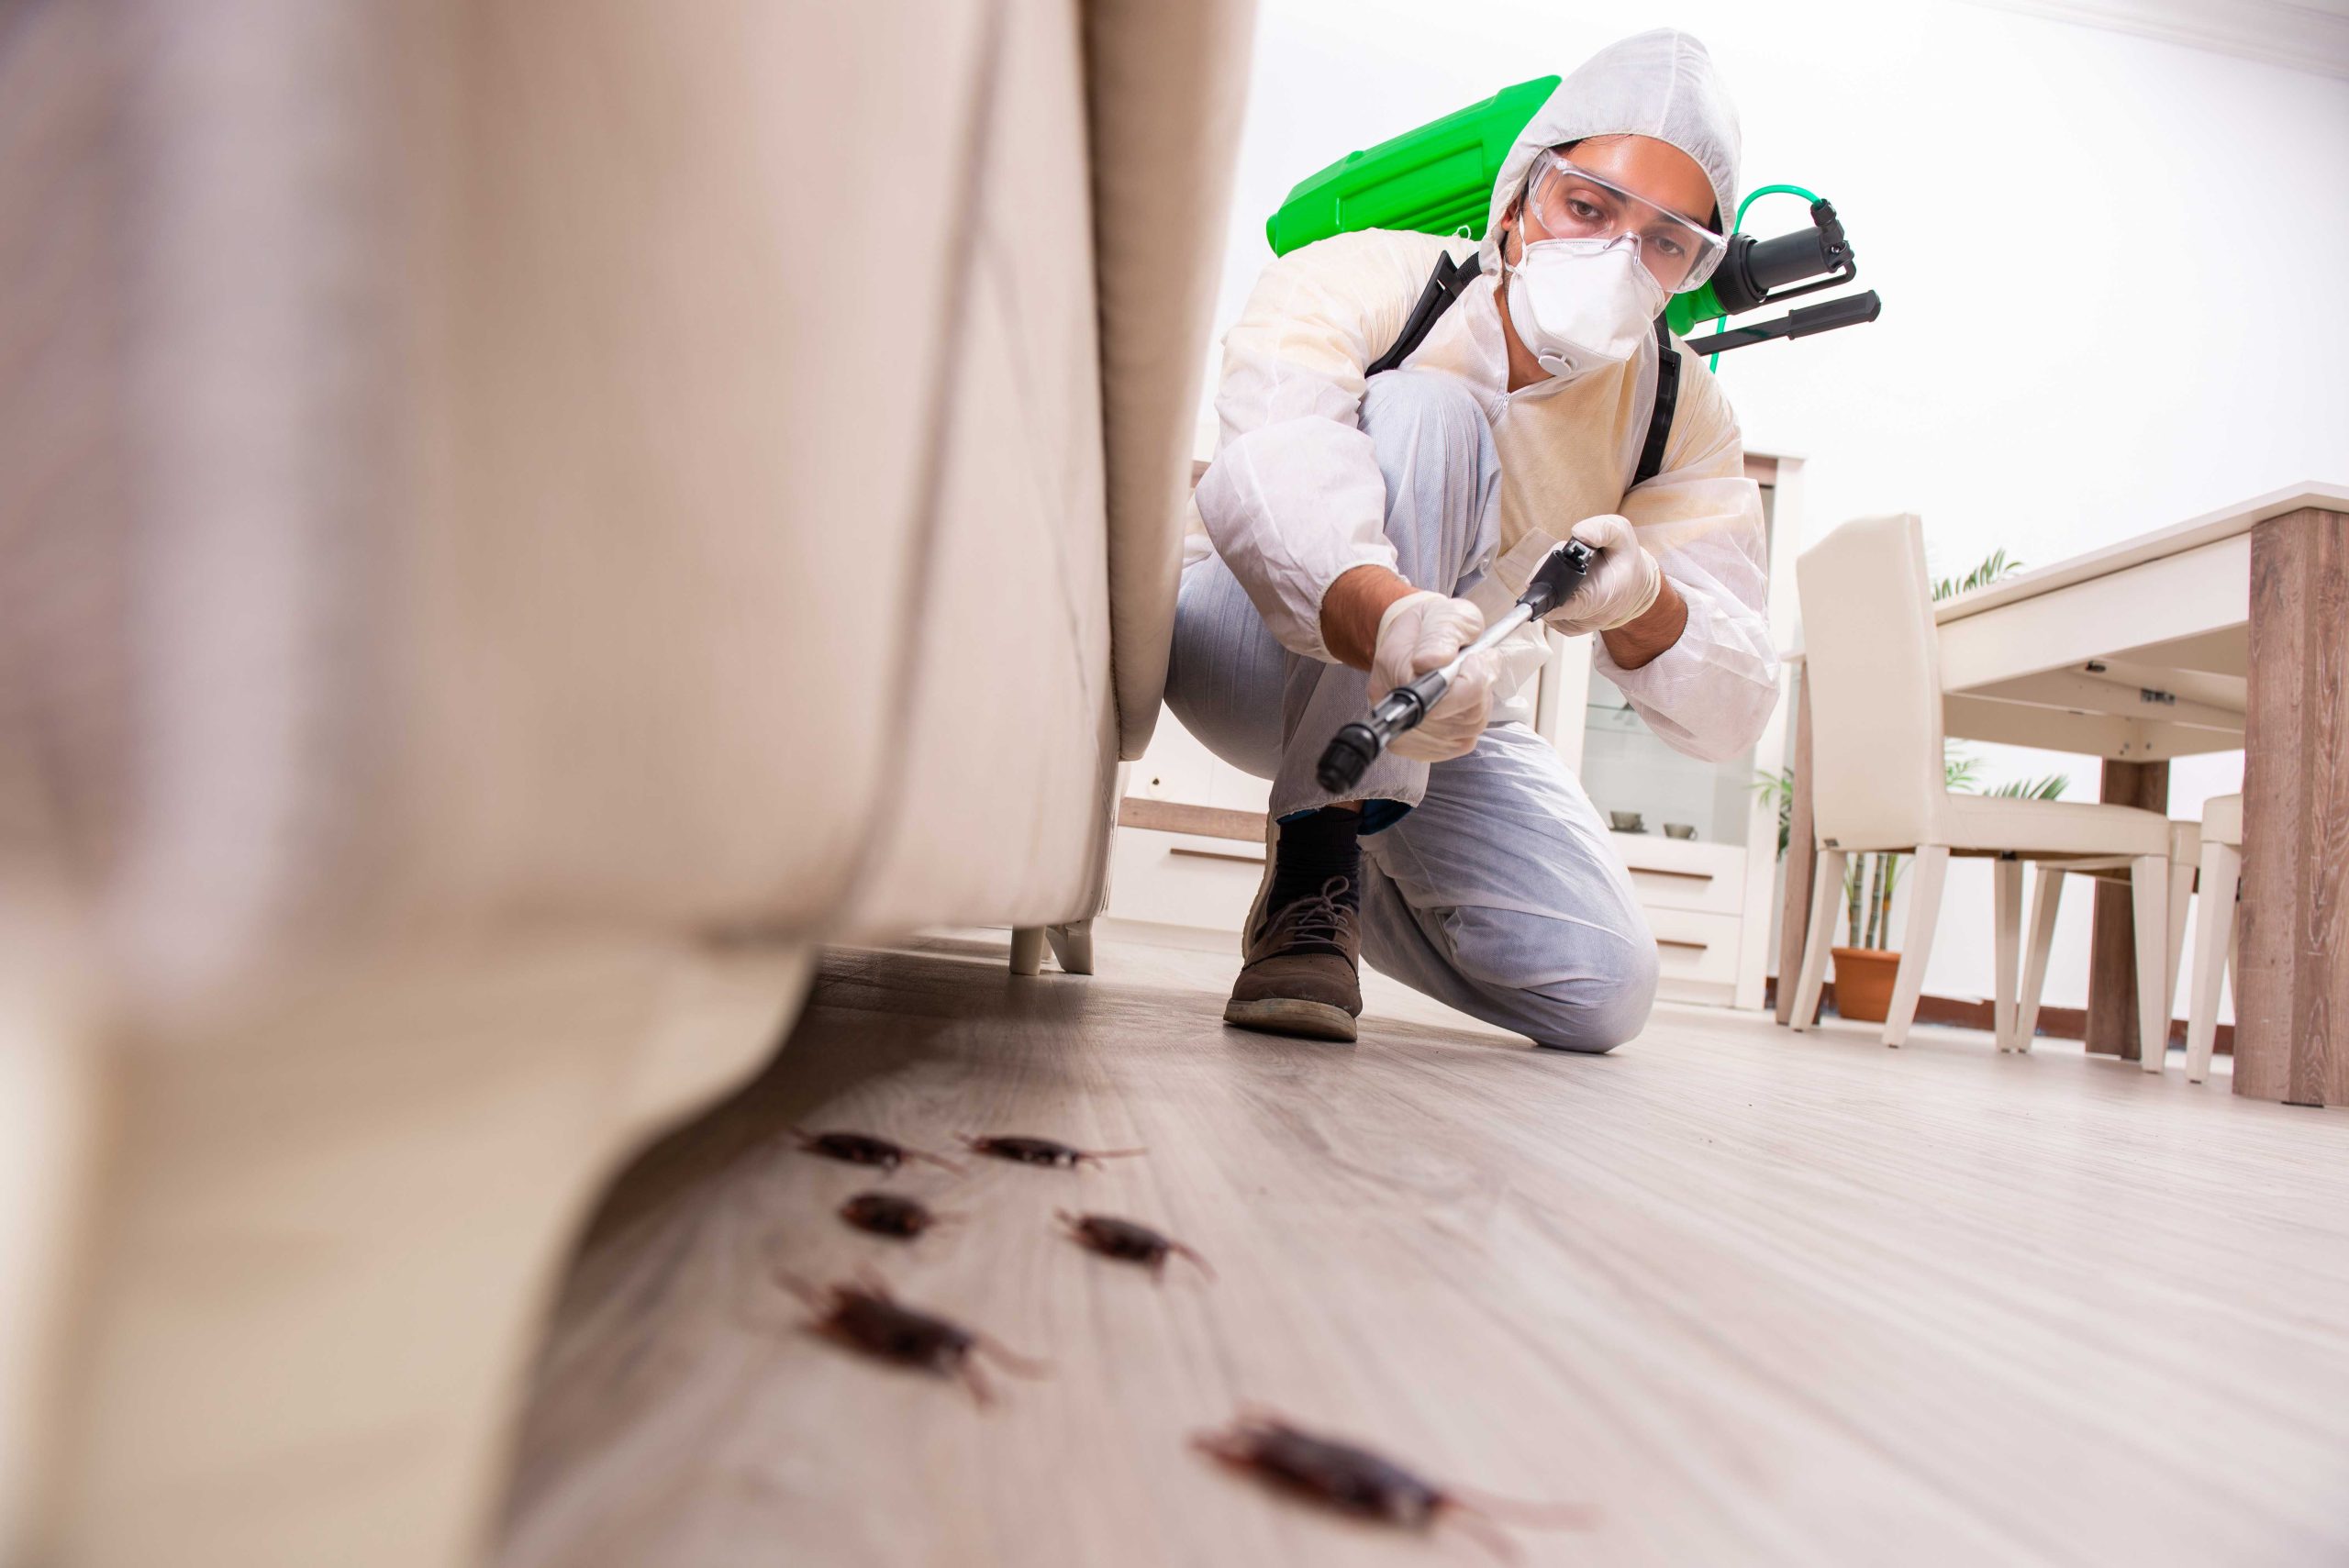 Pest-Control experts in Marietta specializing in prevention and eradication of various pests. Don't let pests damage your property and endanger your health.